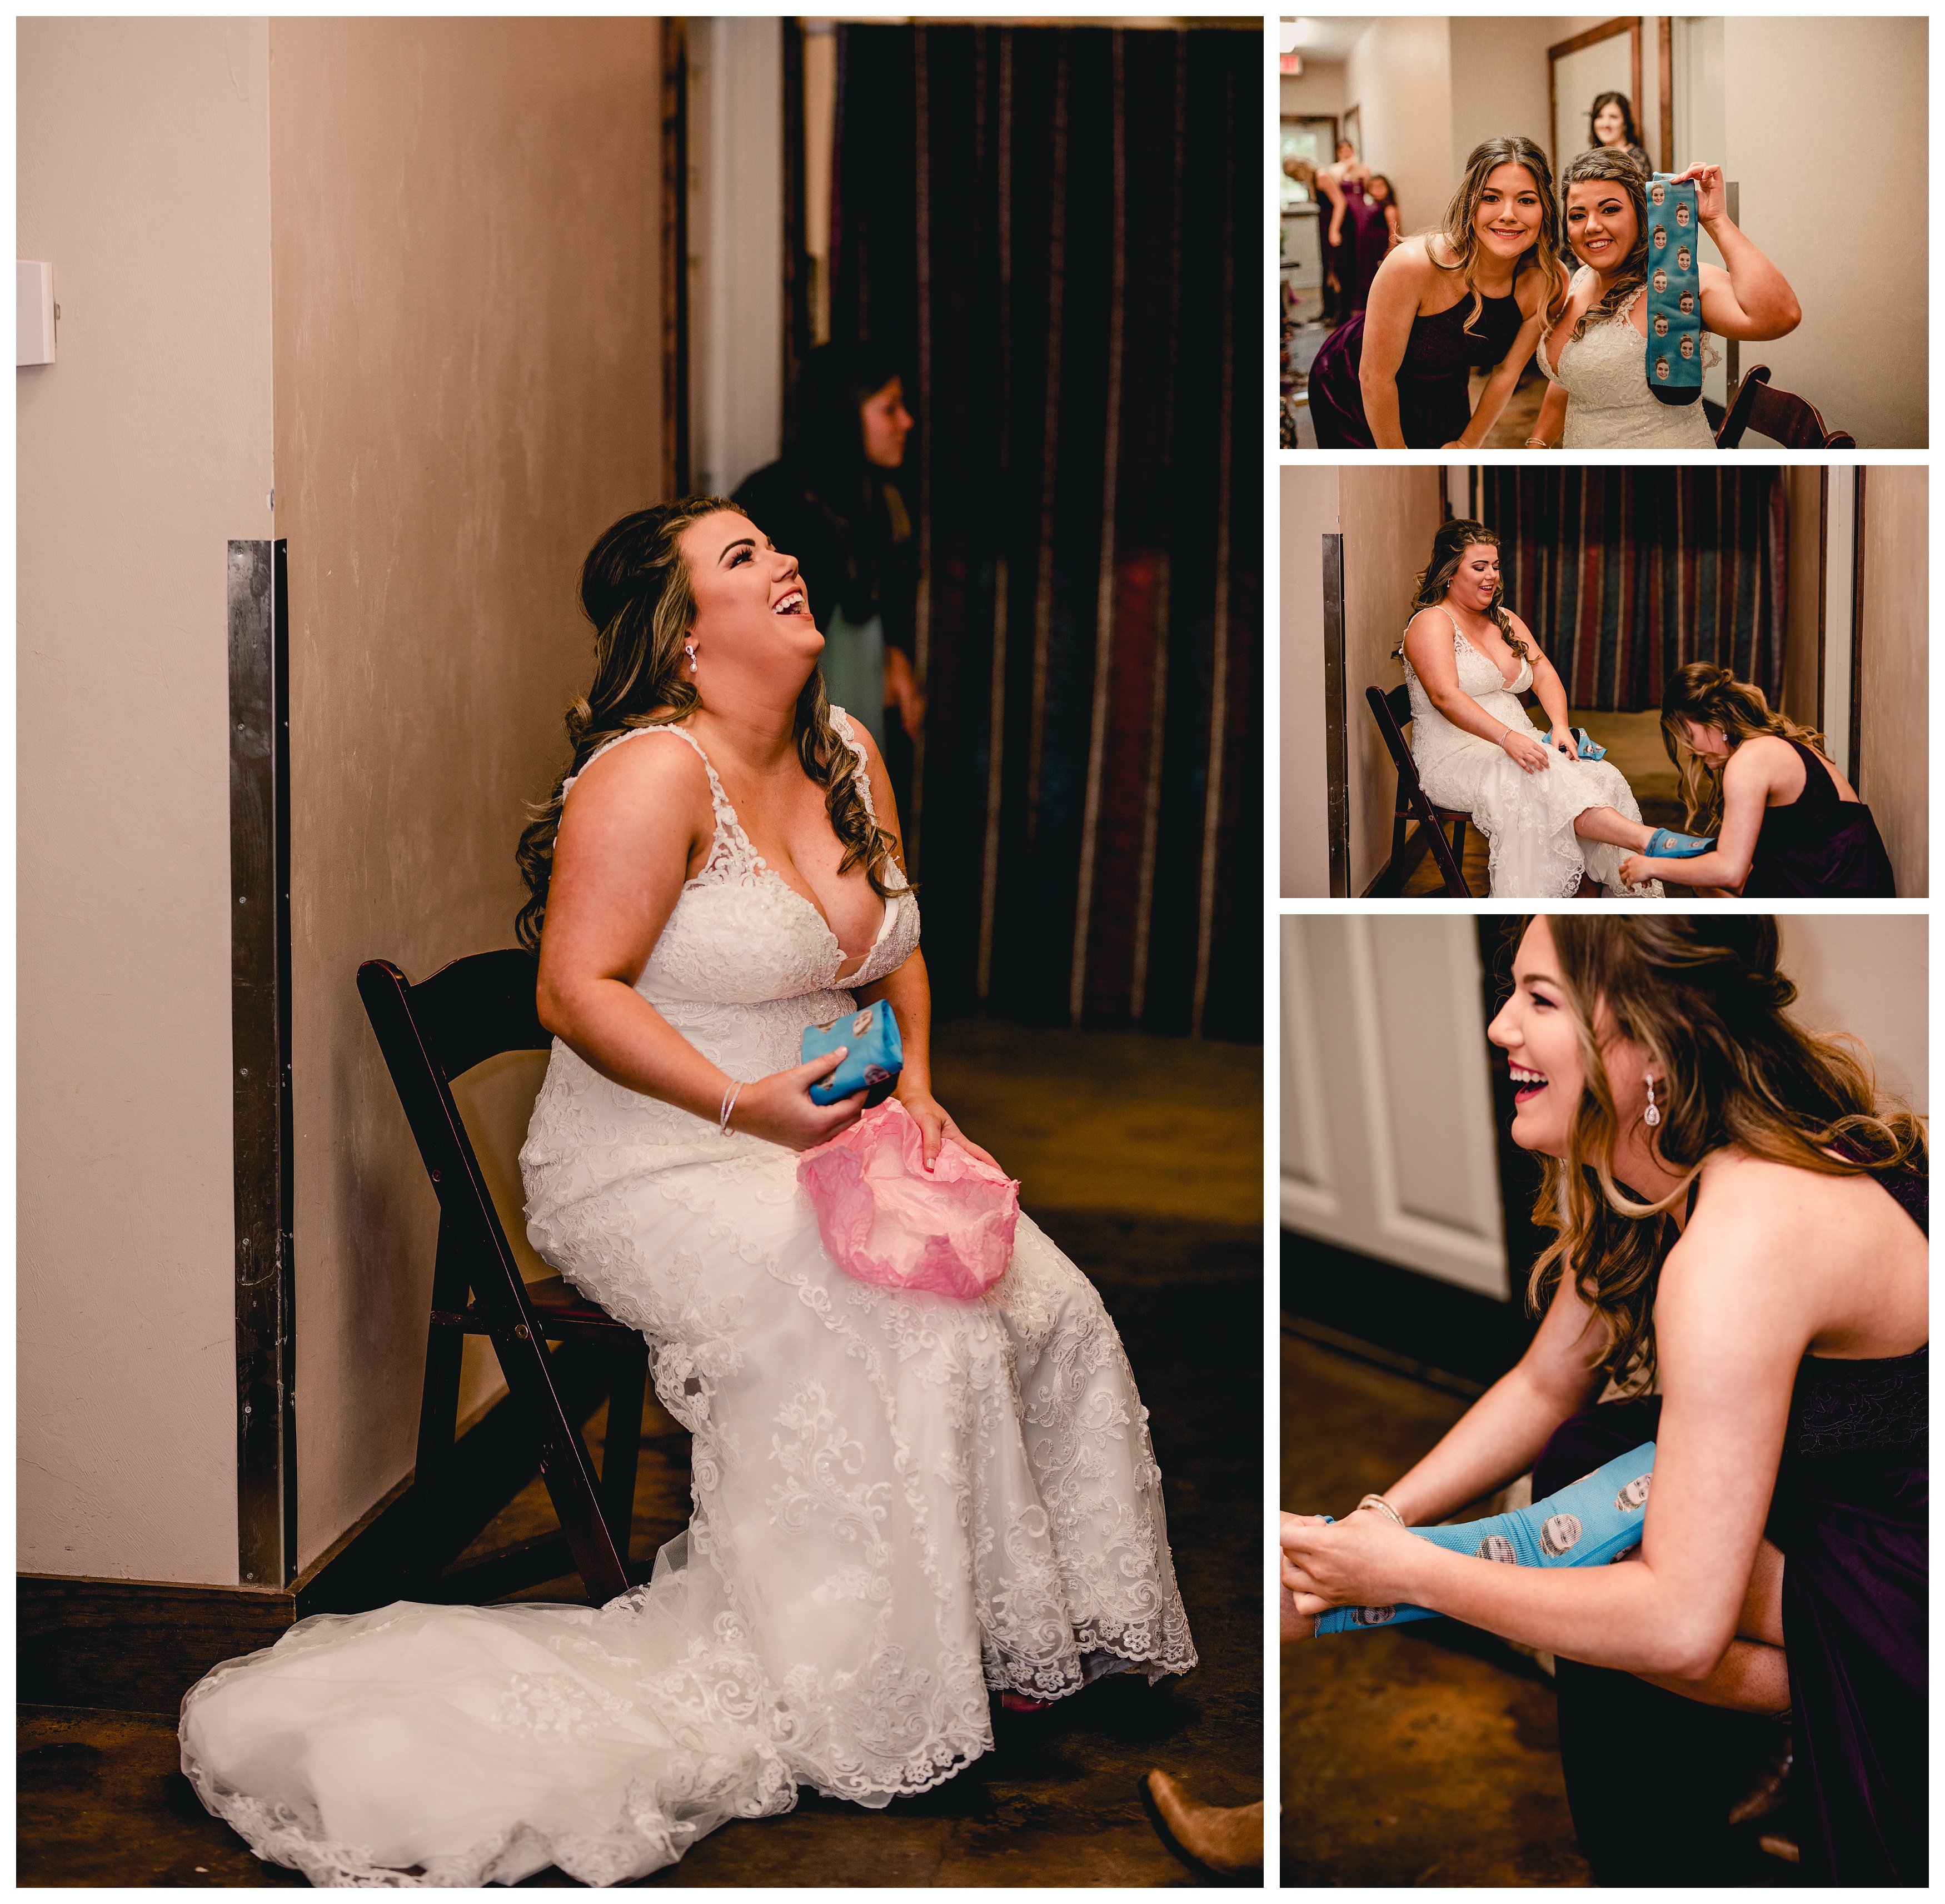 Funny gift from maid of honor during getting ready photos in Tallahassee, Florida. Shelly Williams Photography